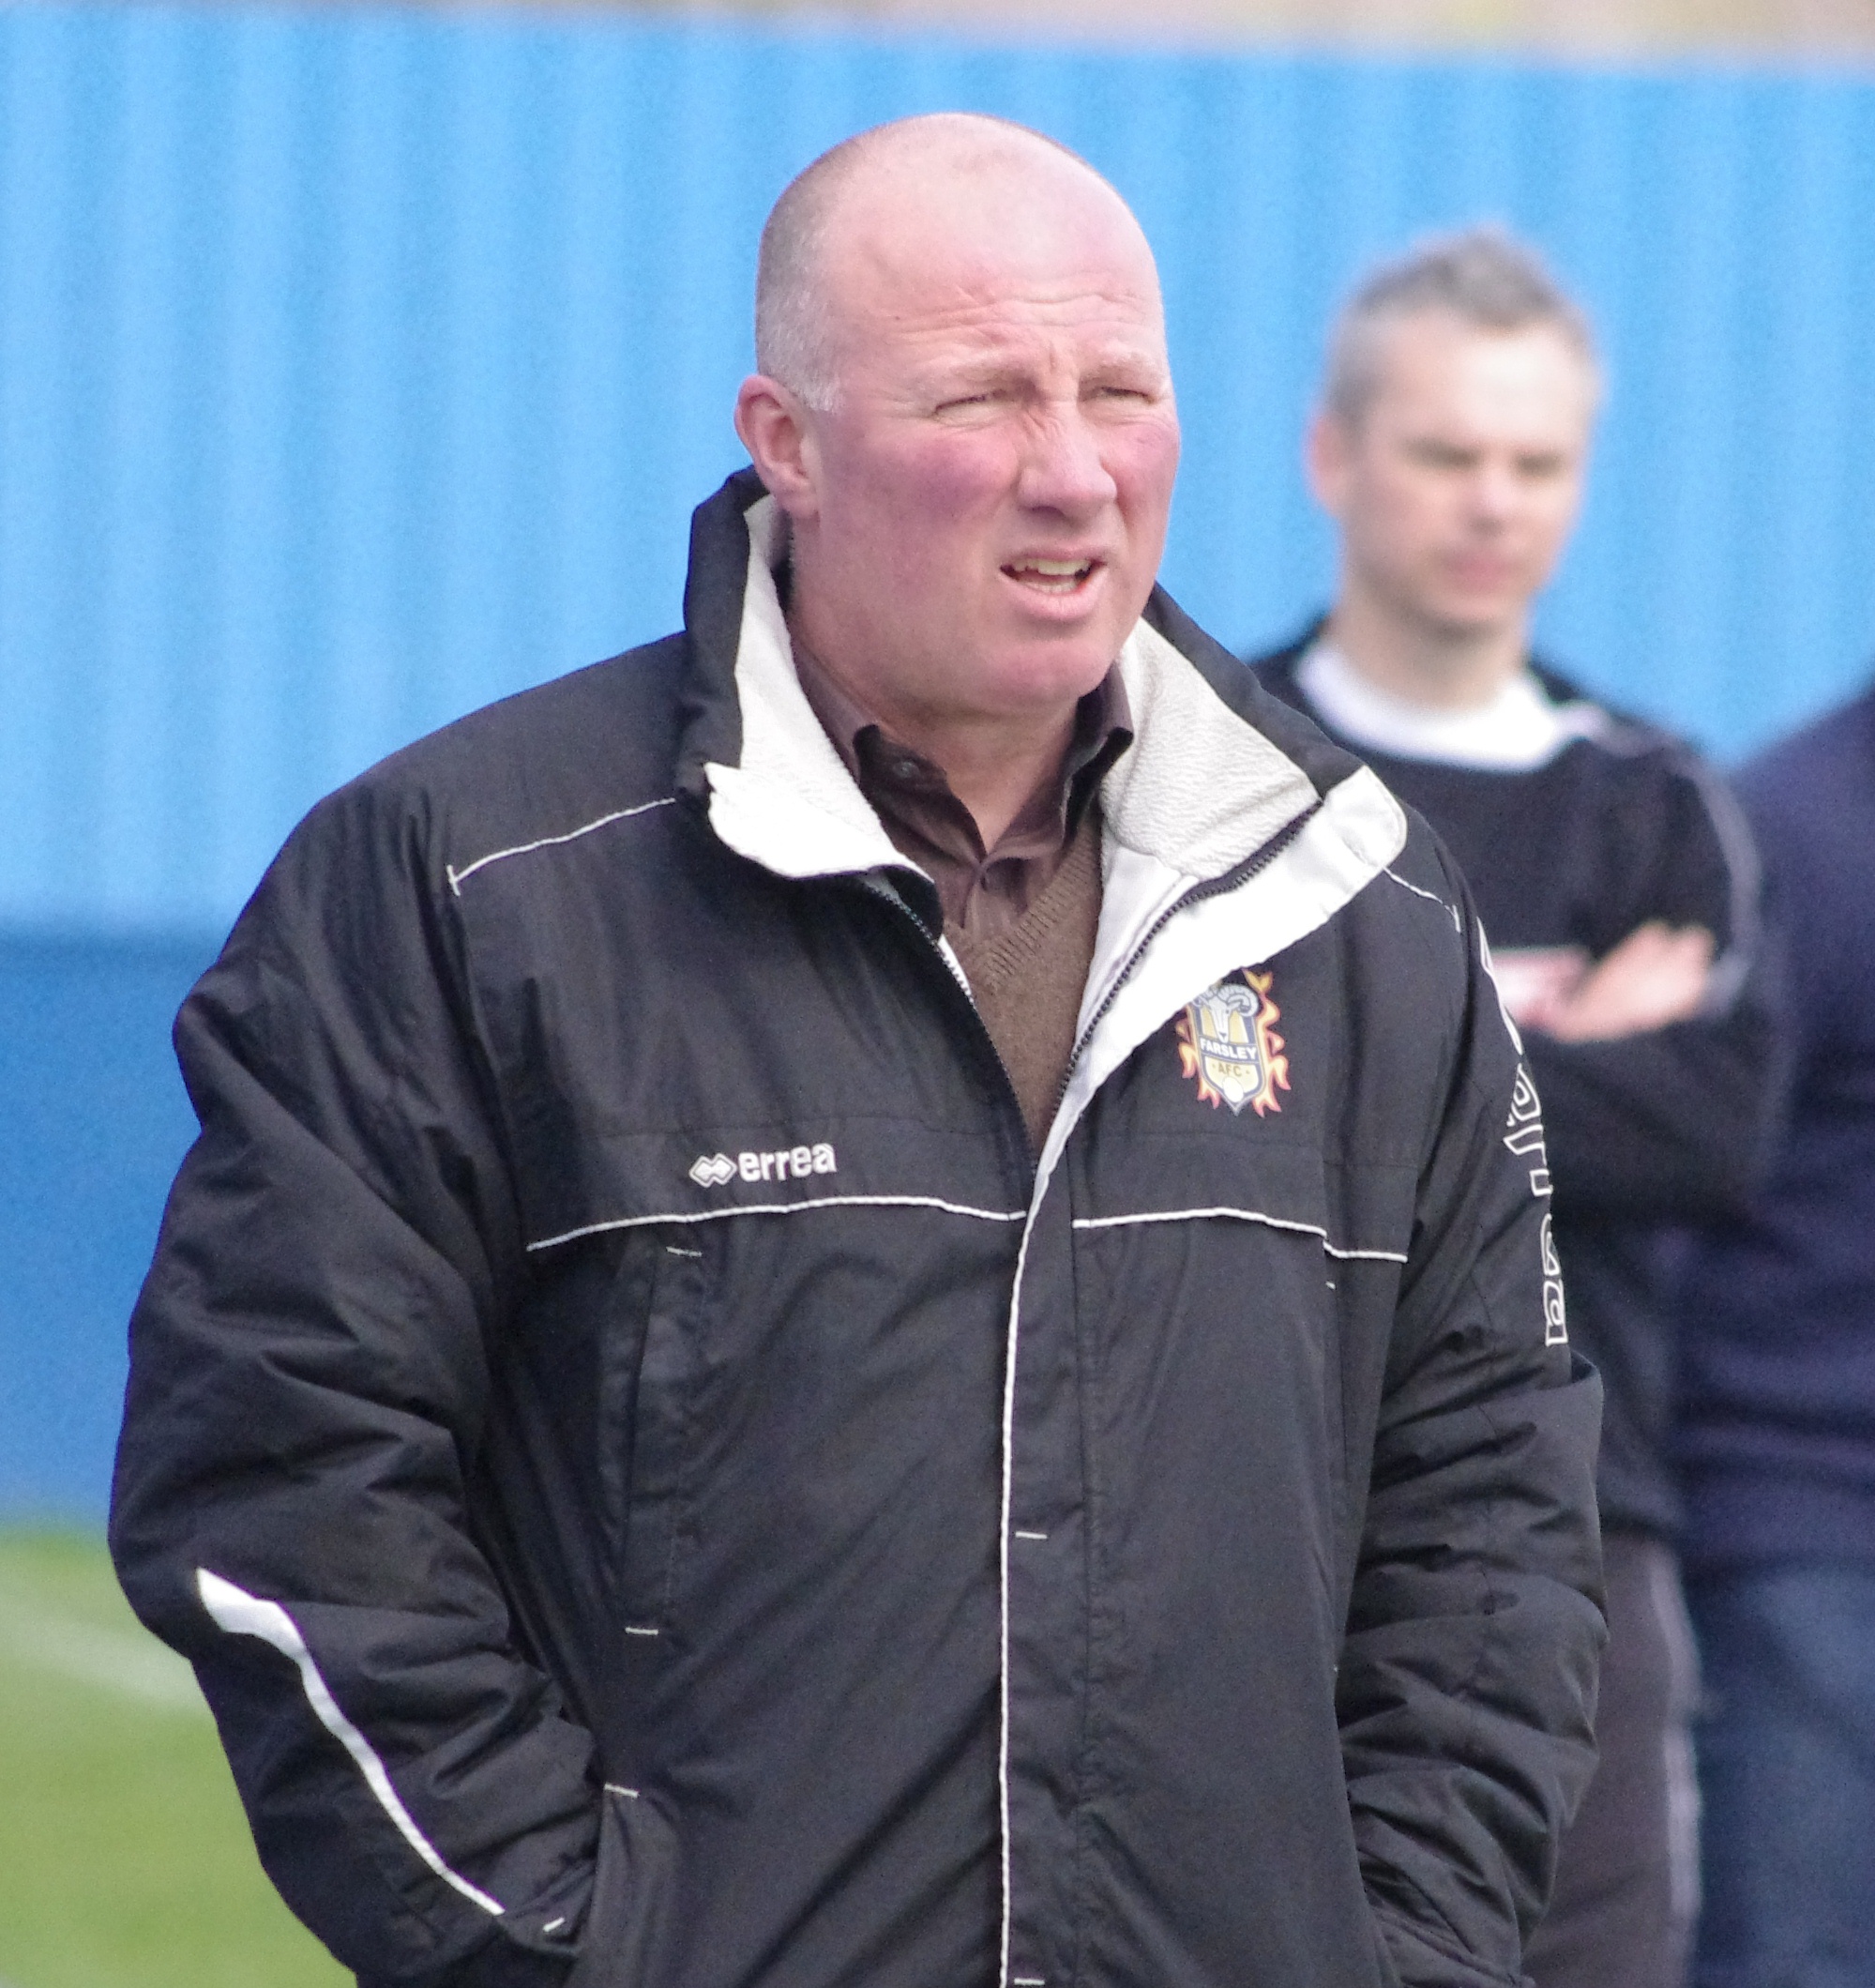 Farsley manager Neil Parsley believes there will be more twists and turns in the race for the play-offs